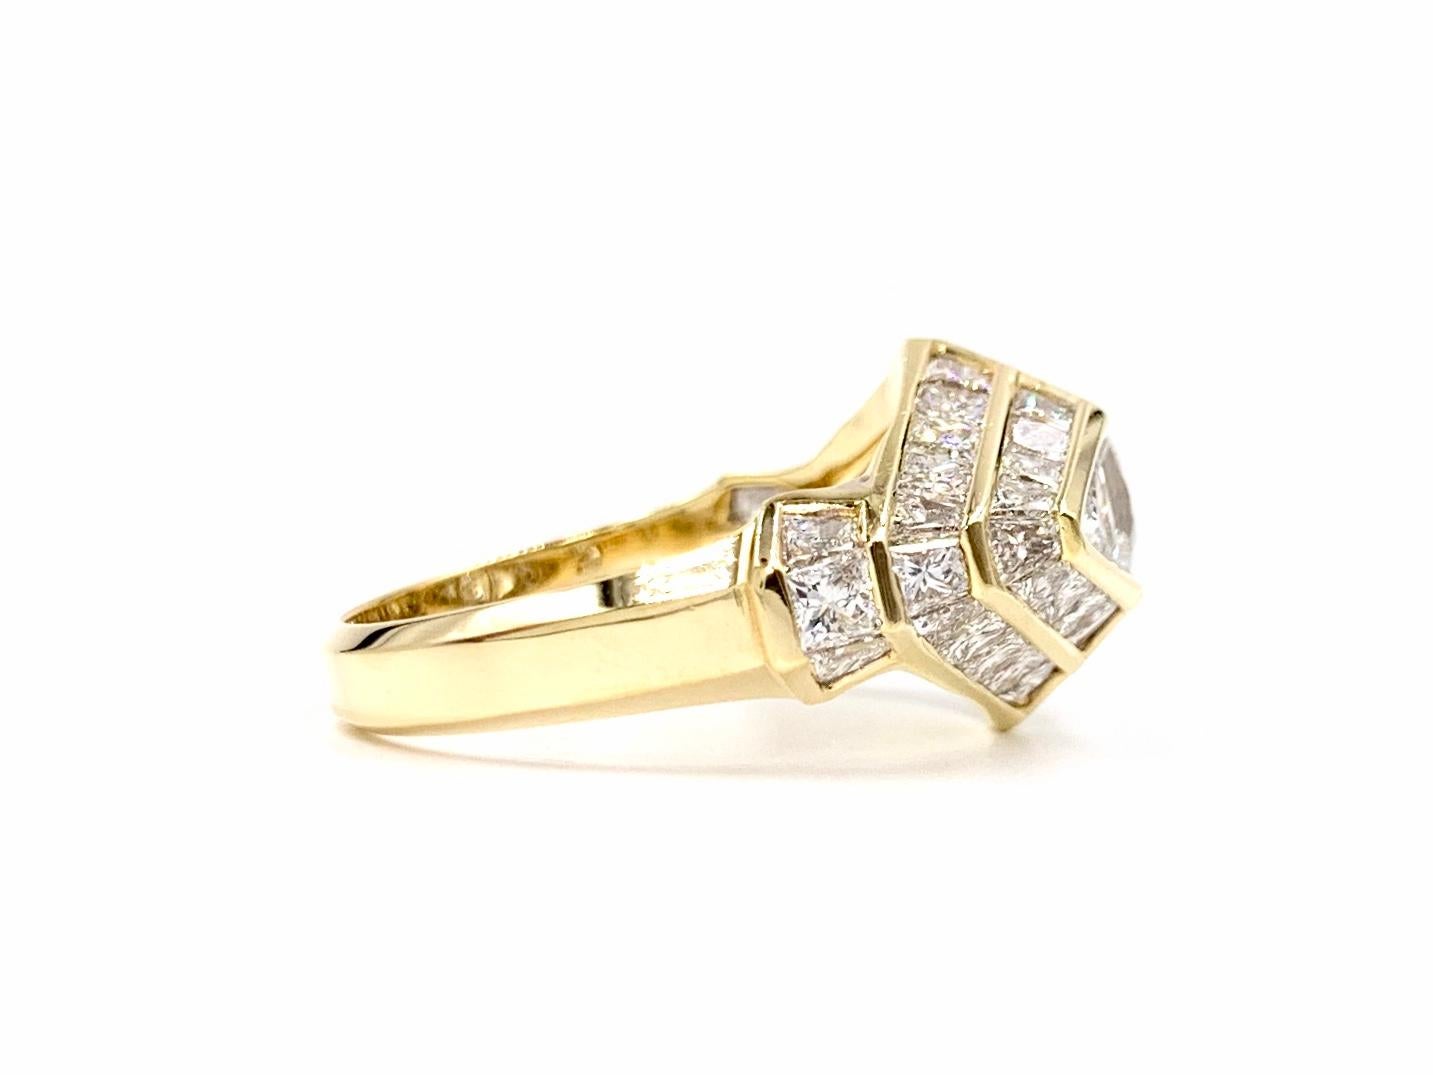 18 Karat Art Deco Inspired Diamond Ring 5.47 Carat Total Weight In Excellent Condition For Sale In Pikesville, MD